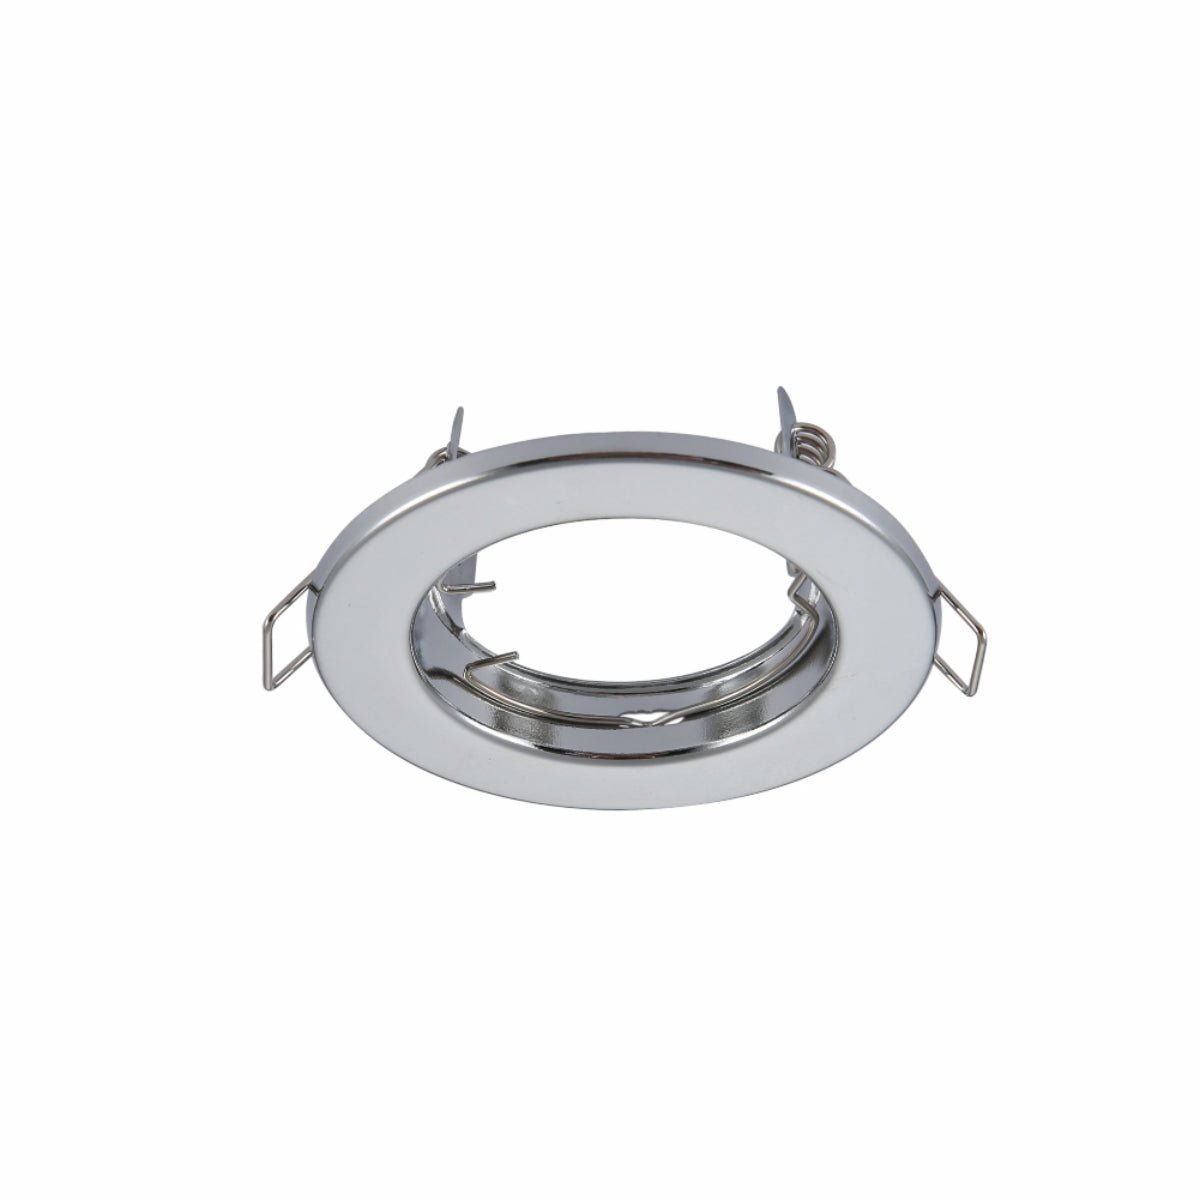 Main image of Fixed Pressed Steel Downlight Chrome IP20 with GU10 Fitting | TEKLED 143-03738